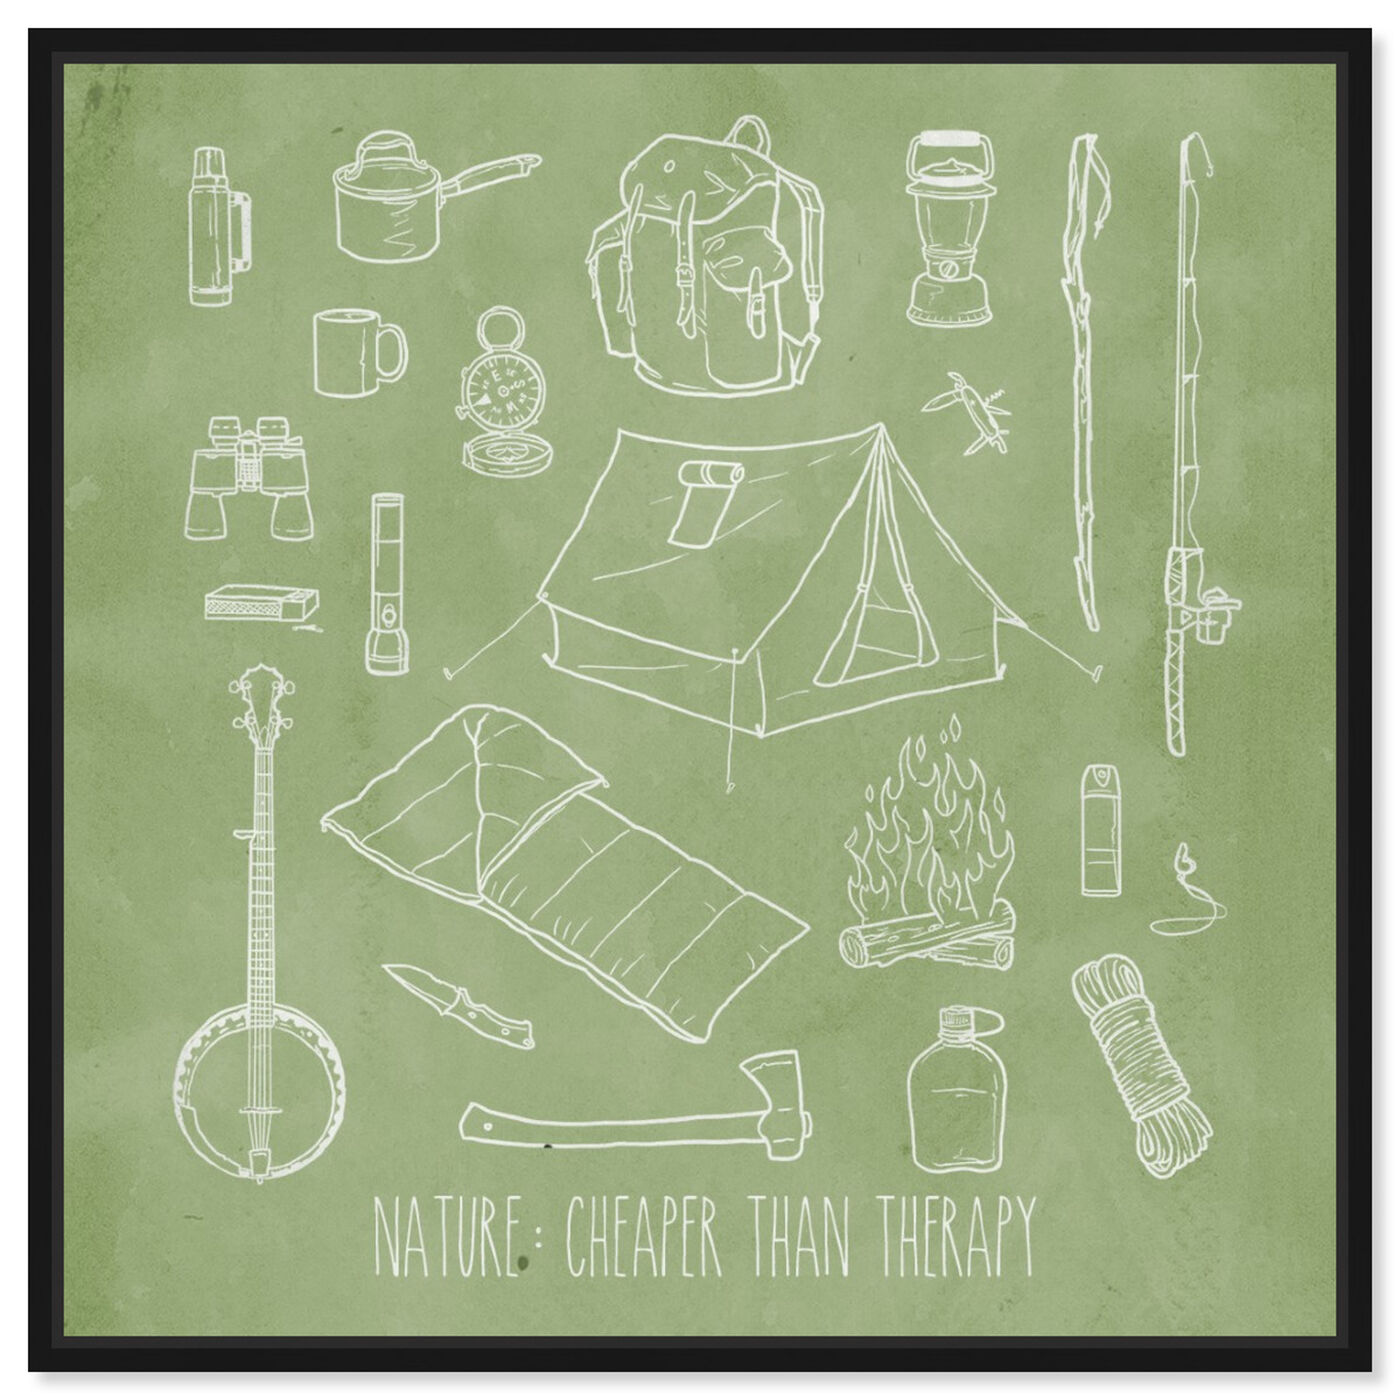 Front view of Cheaper than Therapy featuring entertainment and hobbies and camping art.